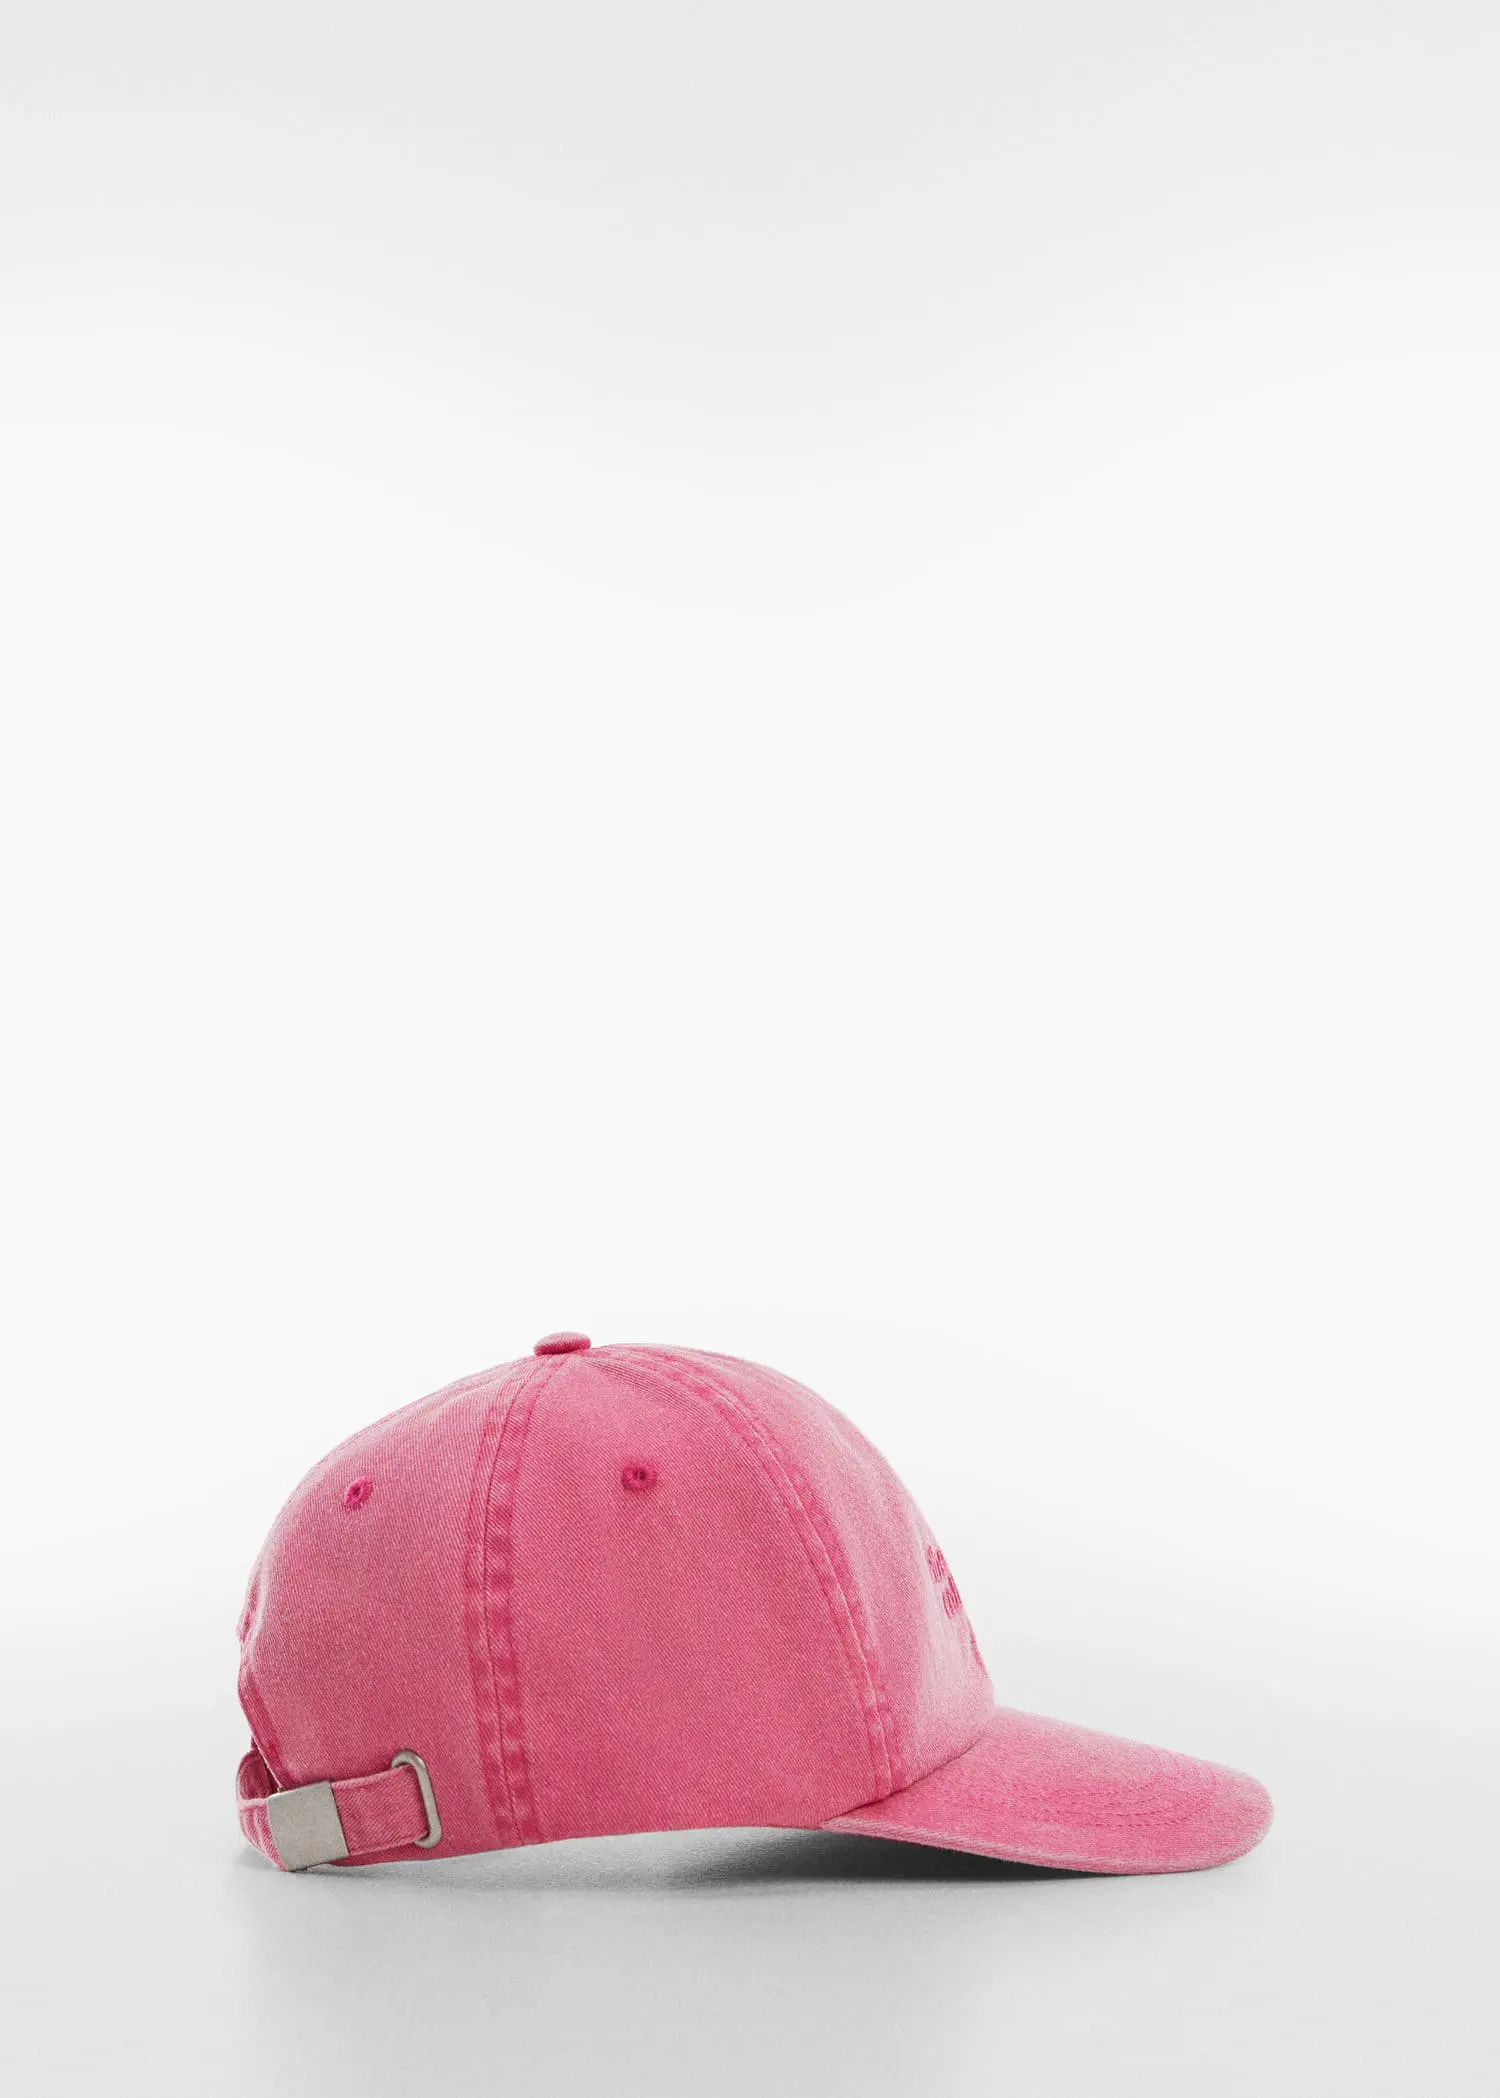 Mango Embroidered message cap. 3